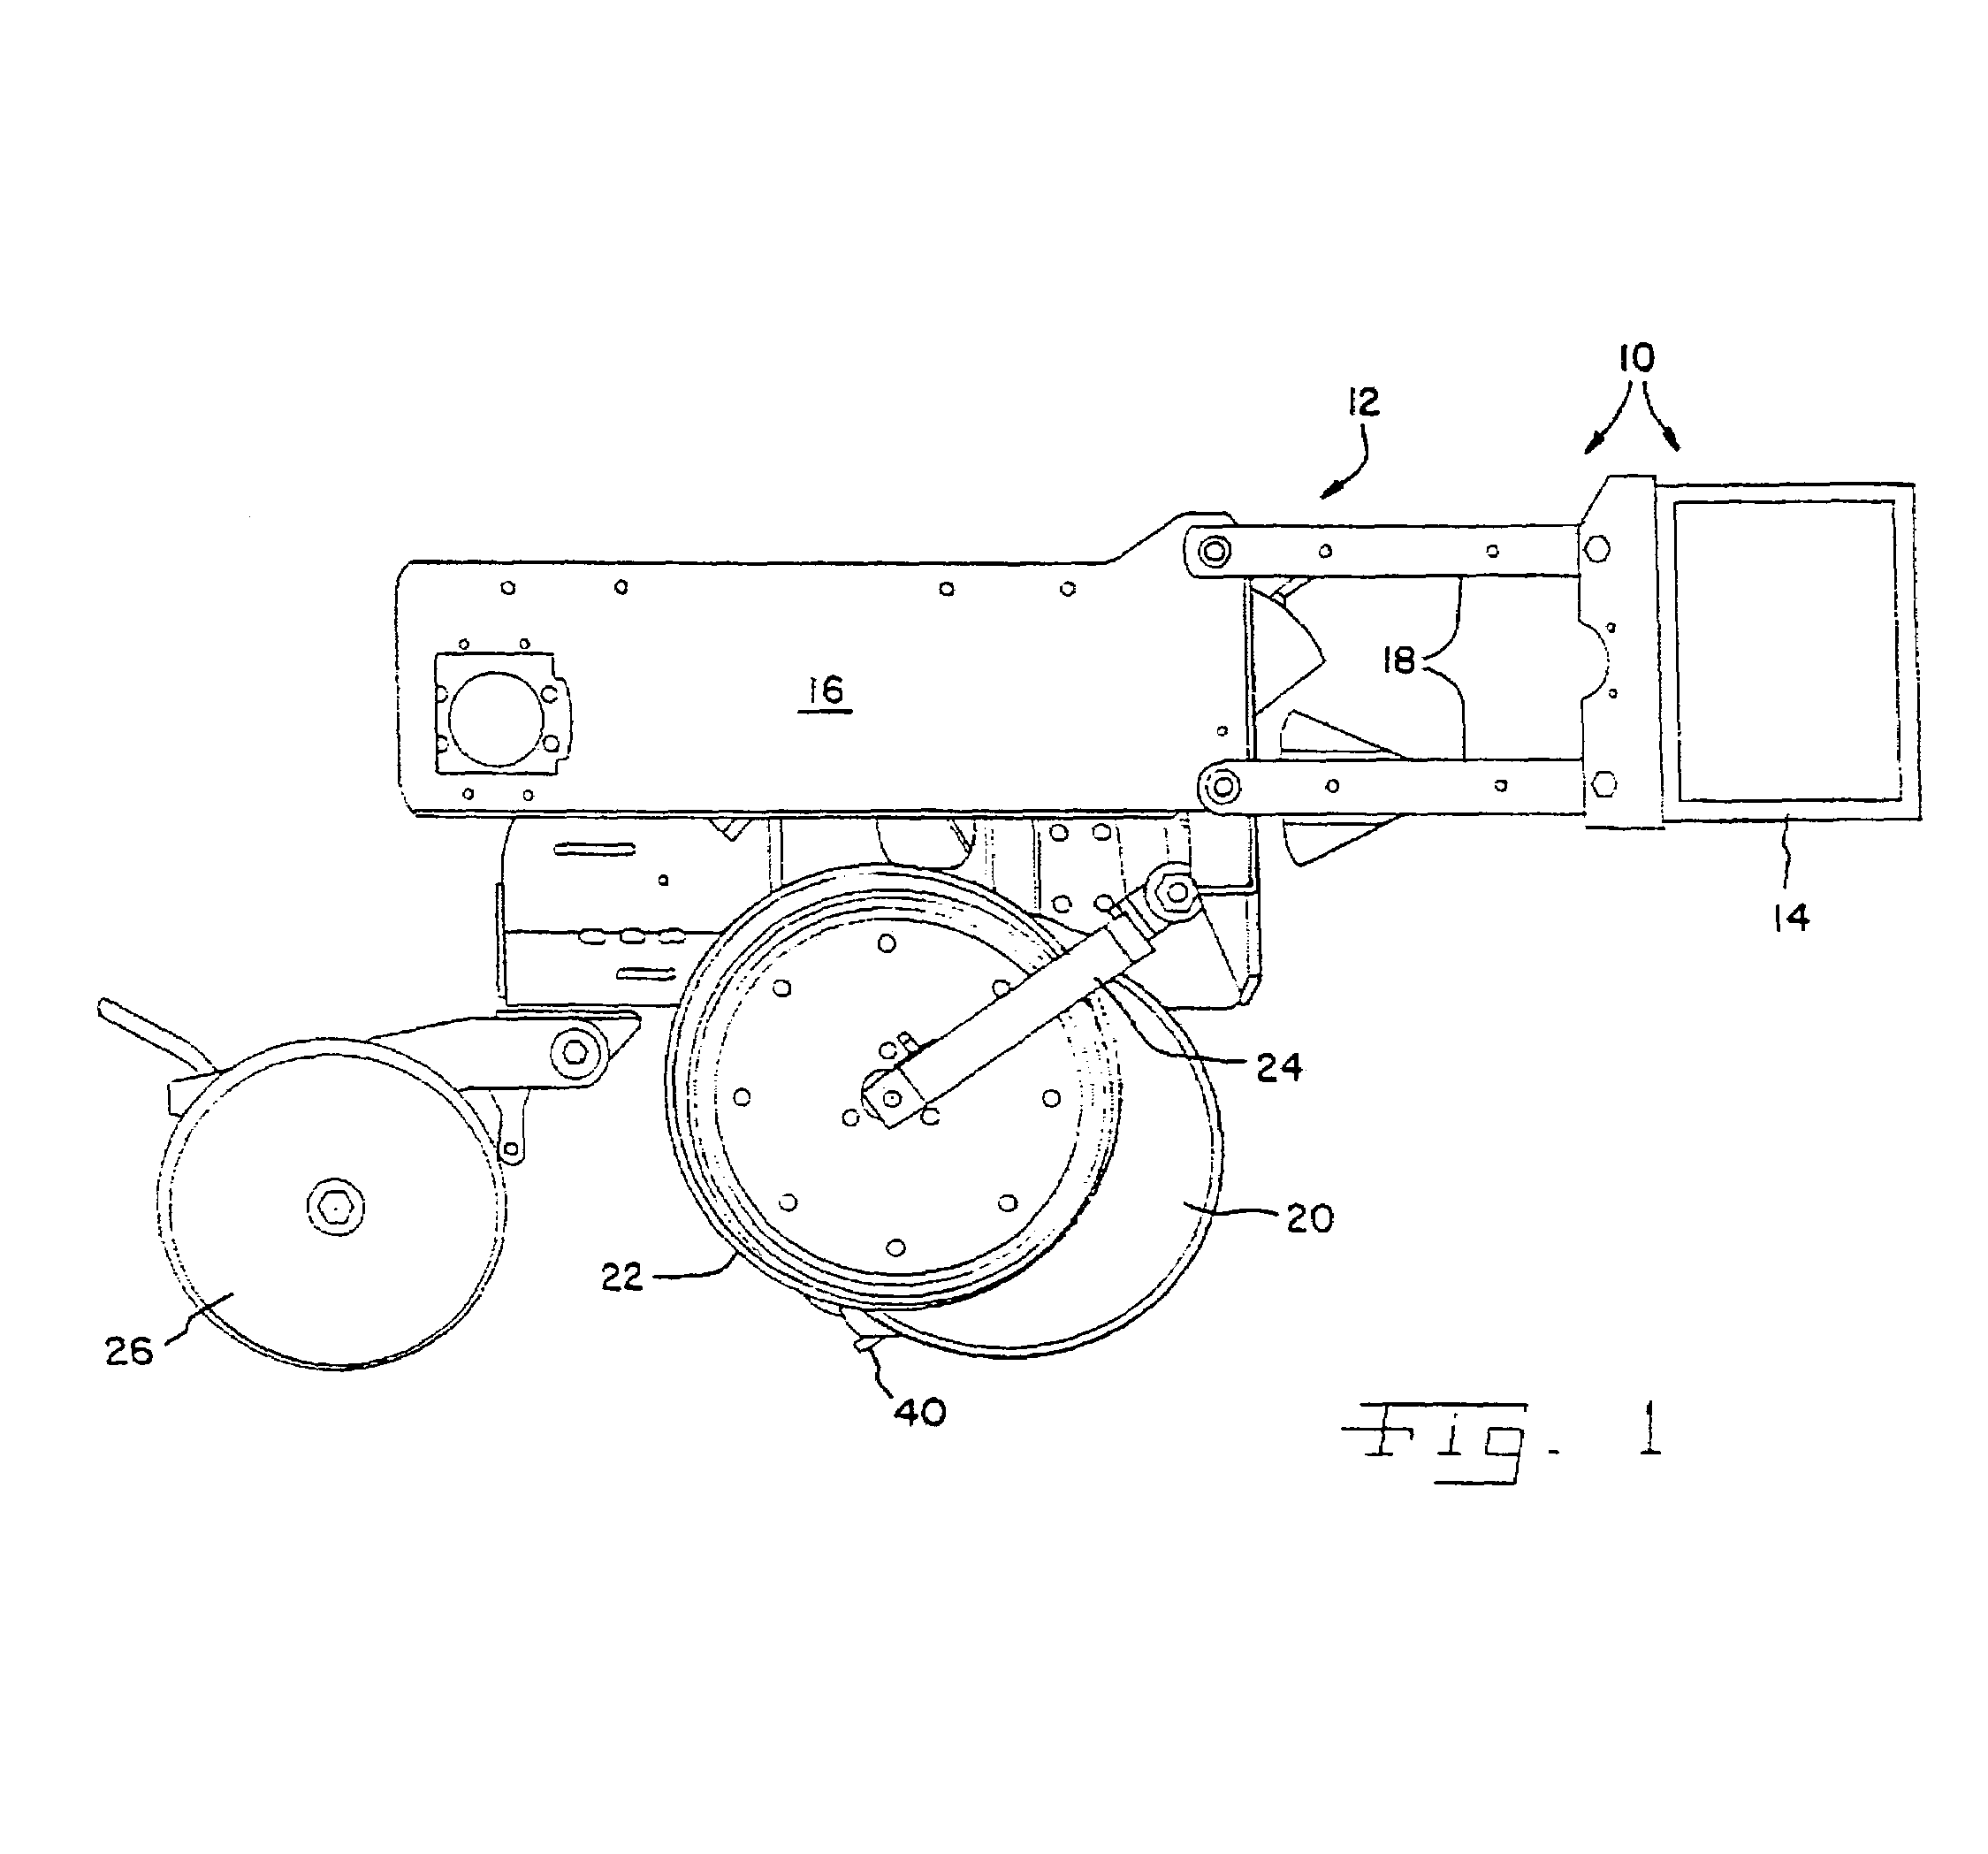 Seed slide for use in an agricultural seeding machine